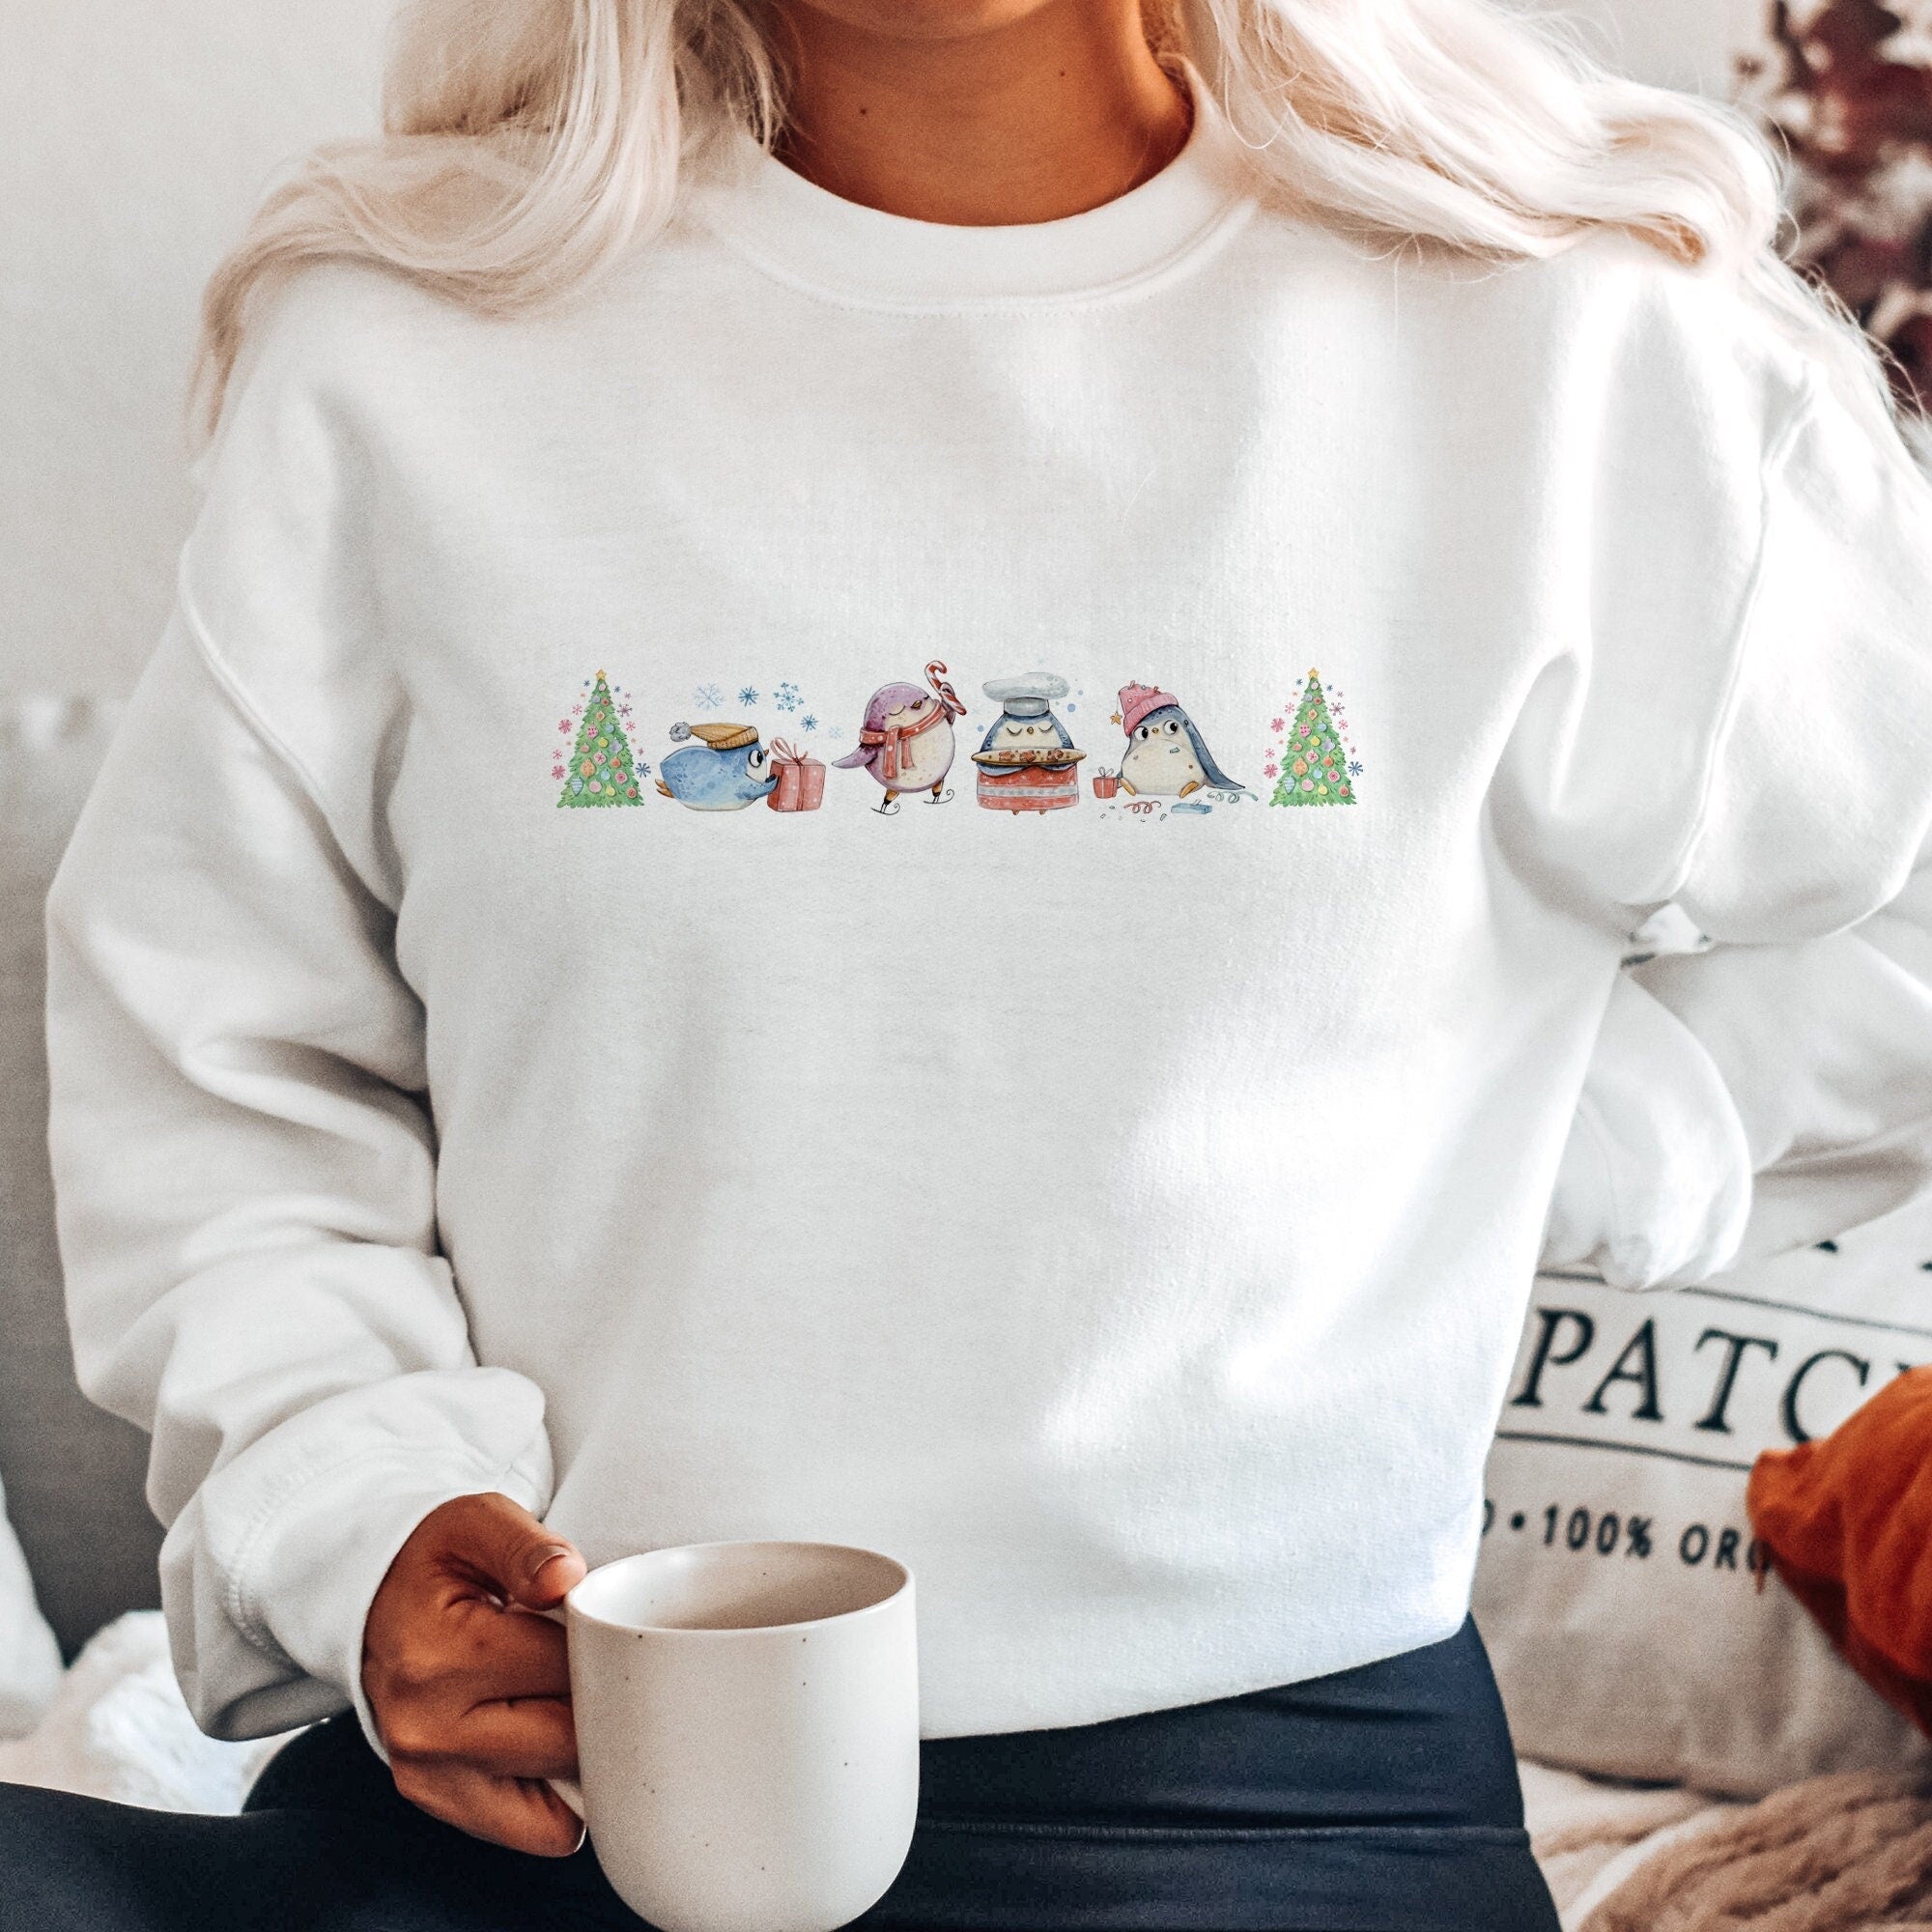 Little Penguins And Tree Christmas Jumper,Xmas Sweatshirt, Cosy Christmas Jumper For Women